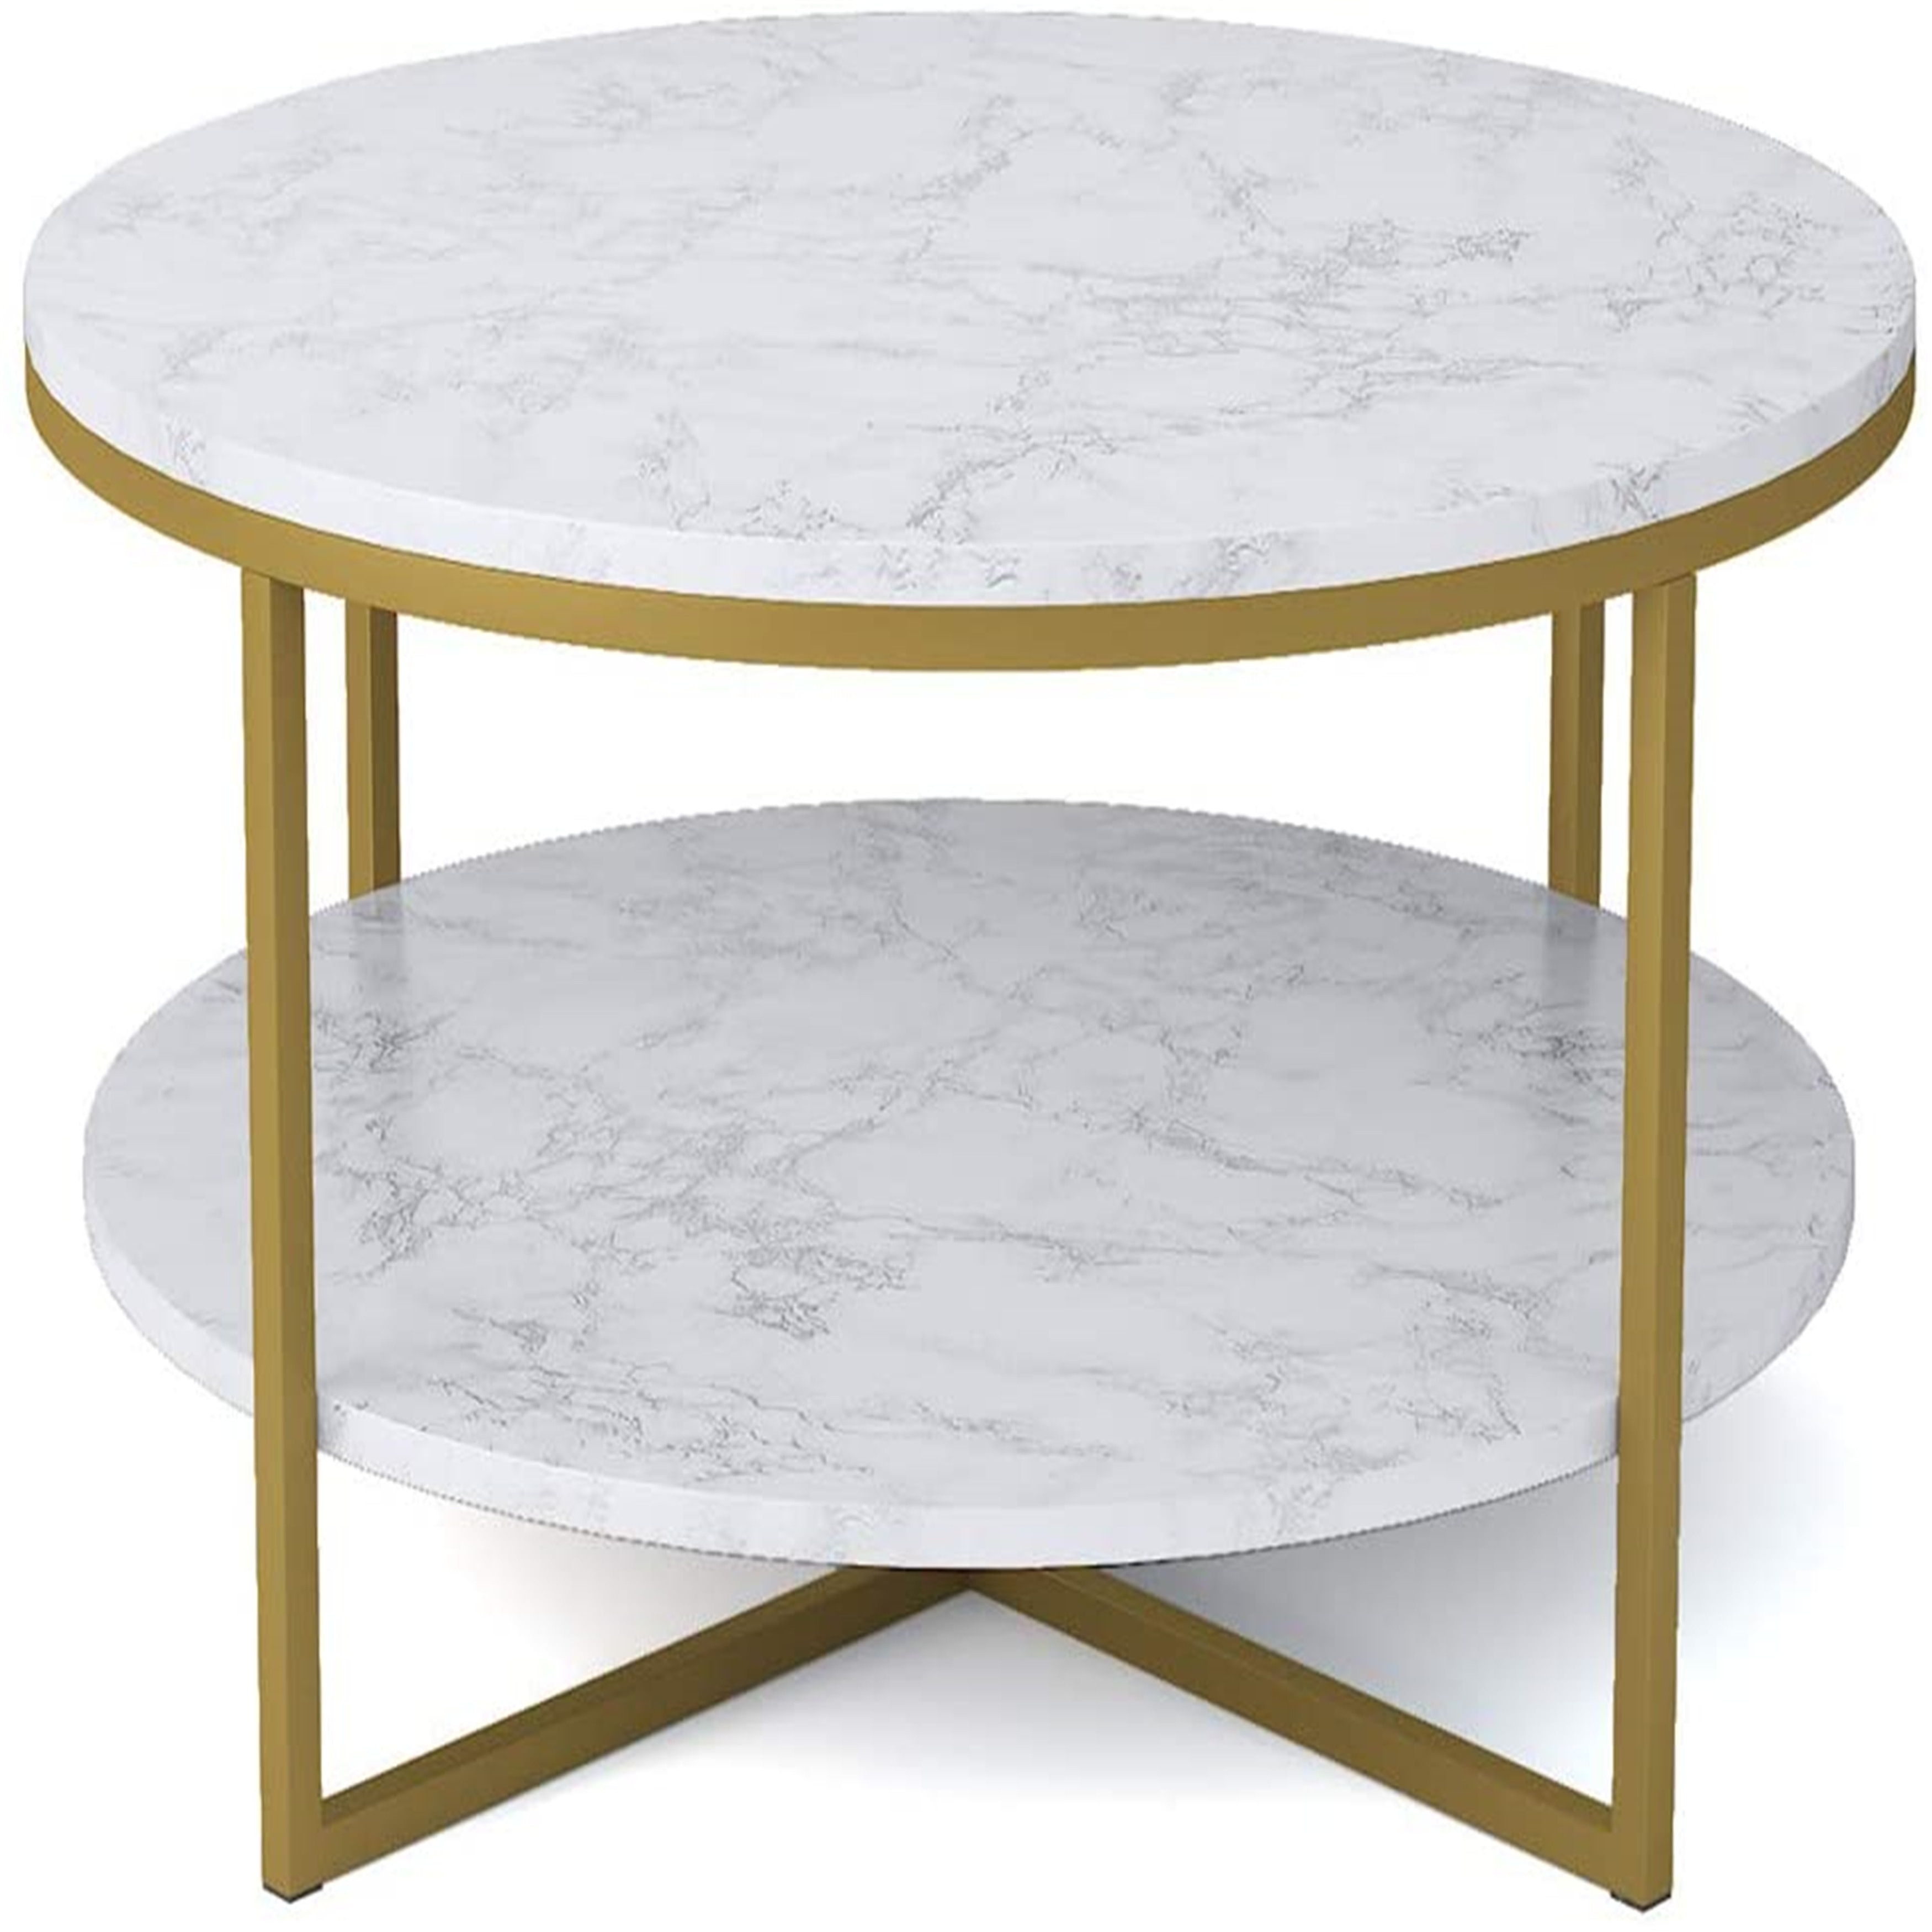 [View 23+] Round Marble Coffee Table With Gold Legs